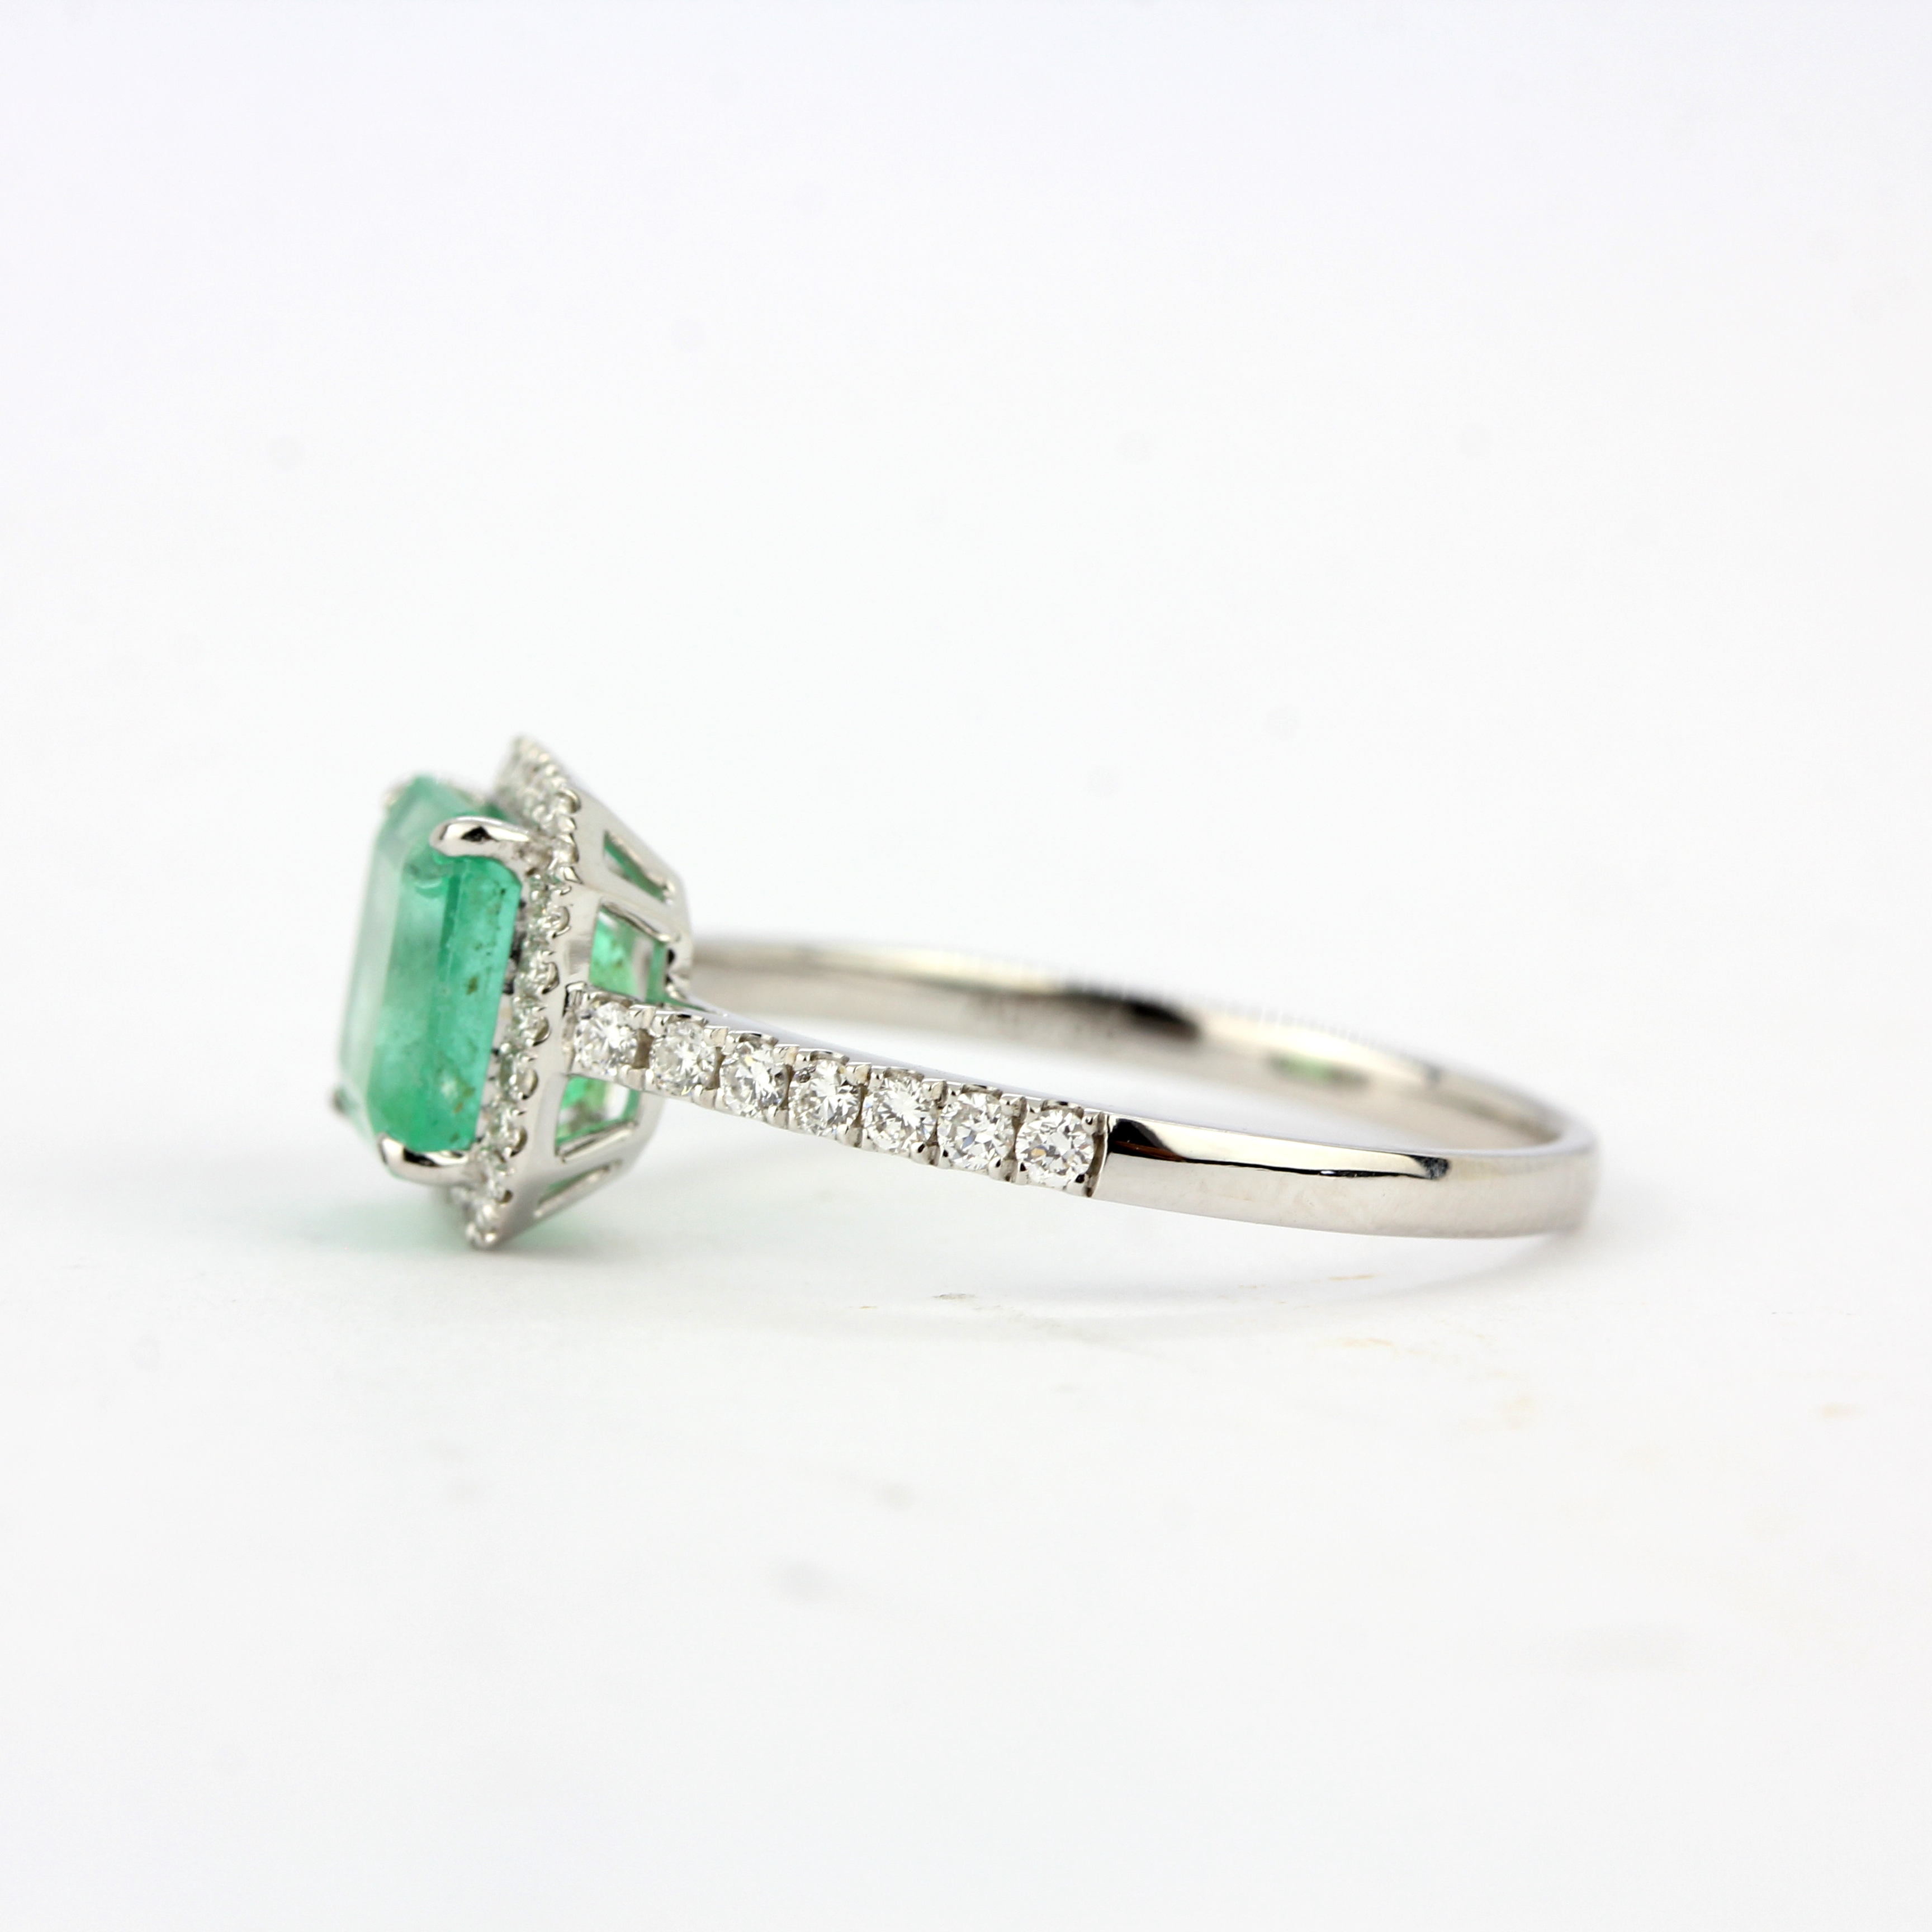 An 18ct white gold ring set with an emerald cut emerald and diamonds, ring size P. - Image 2 of 3